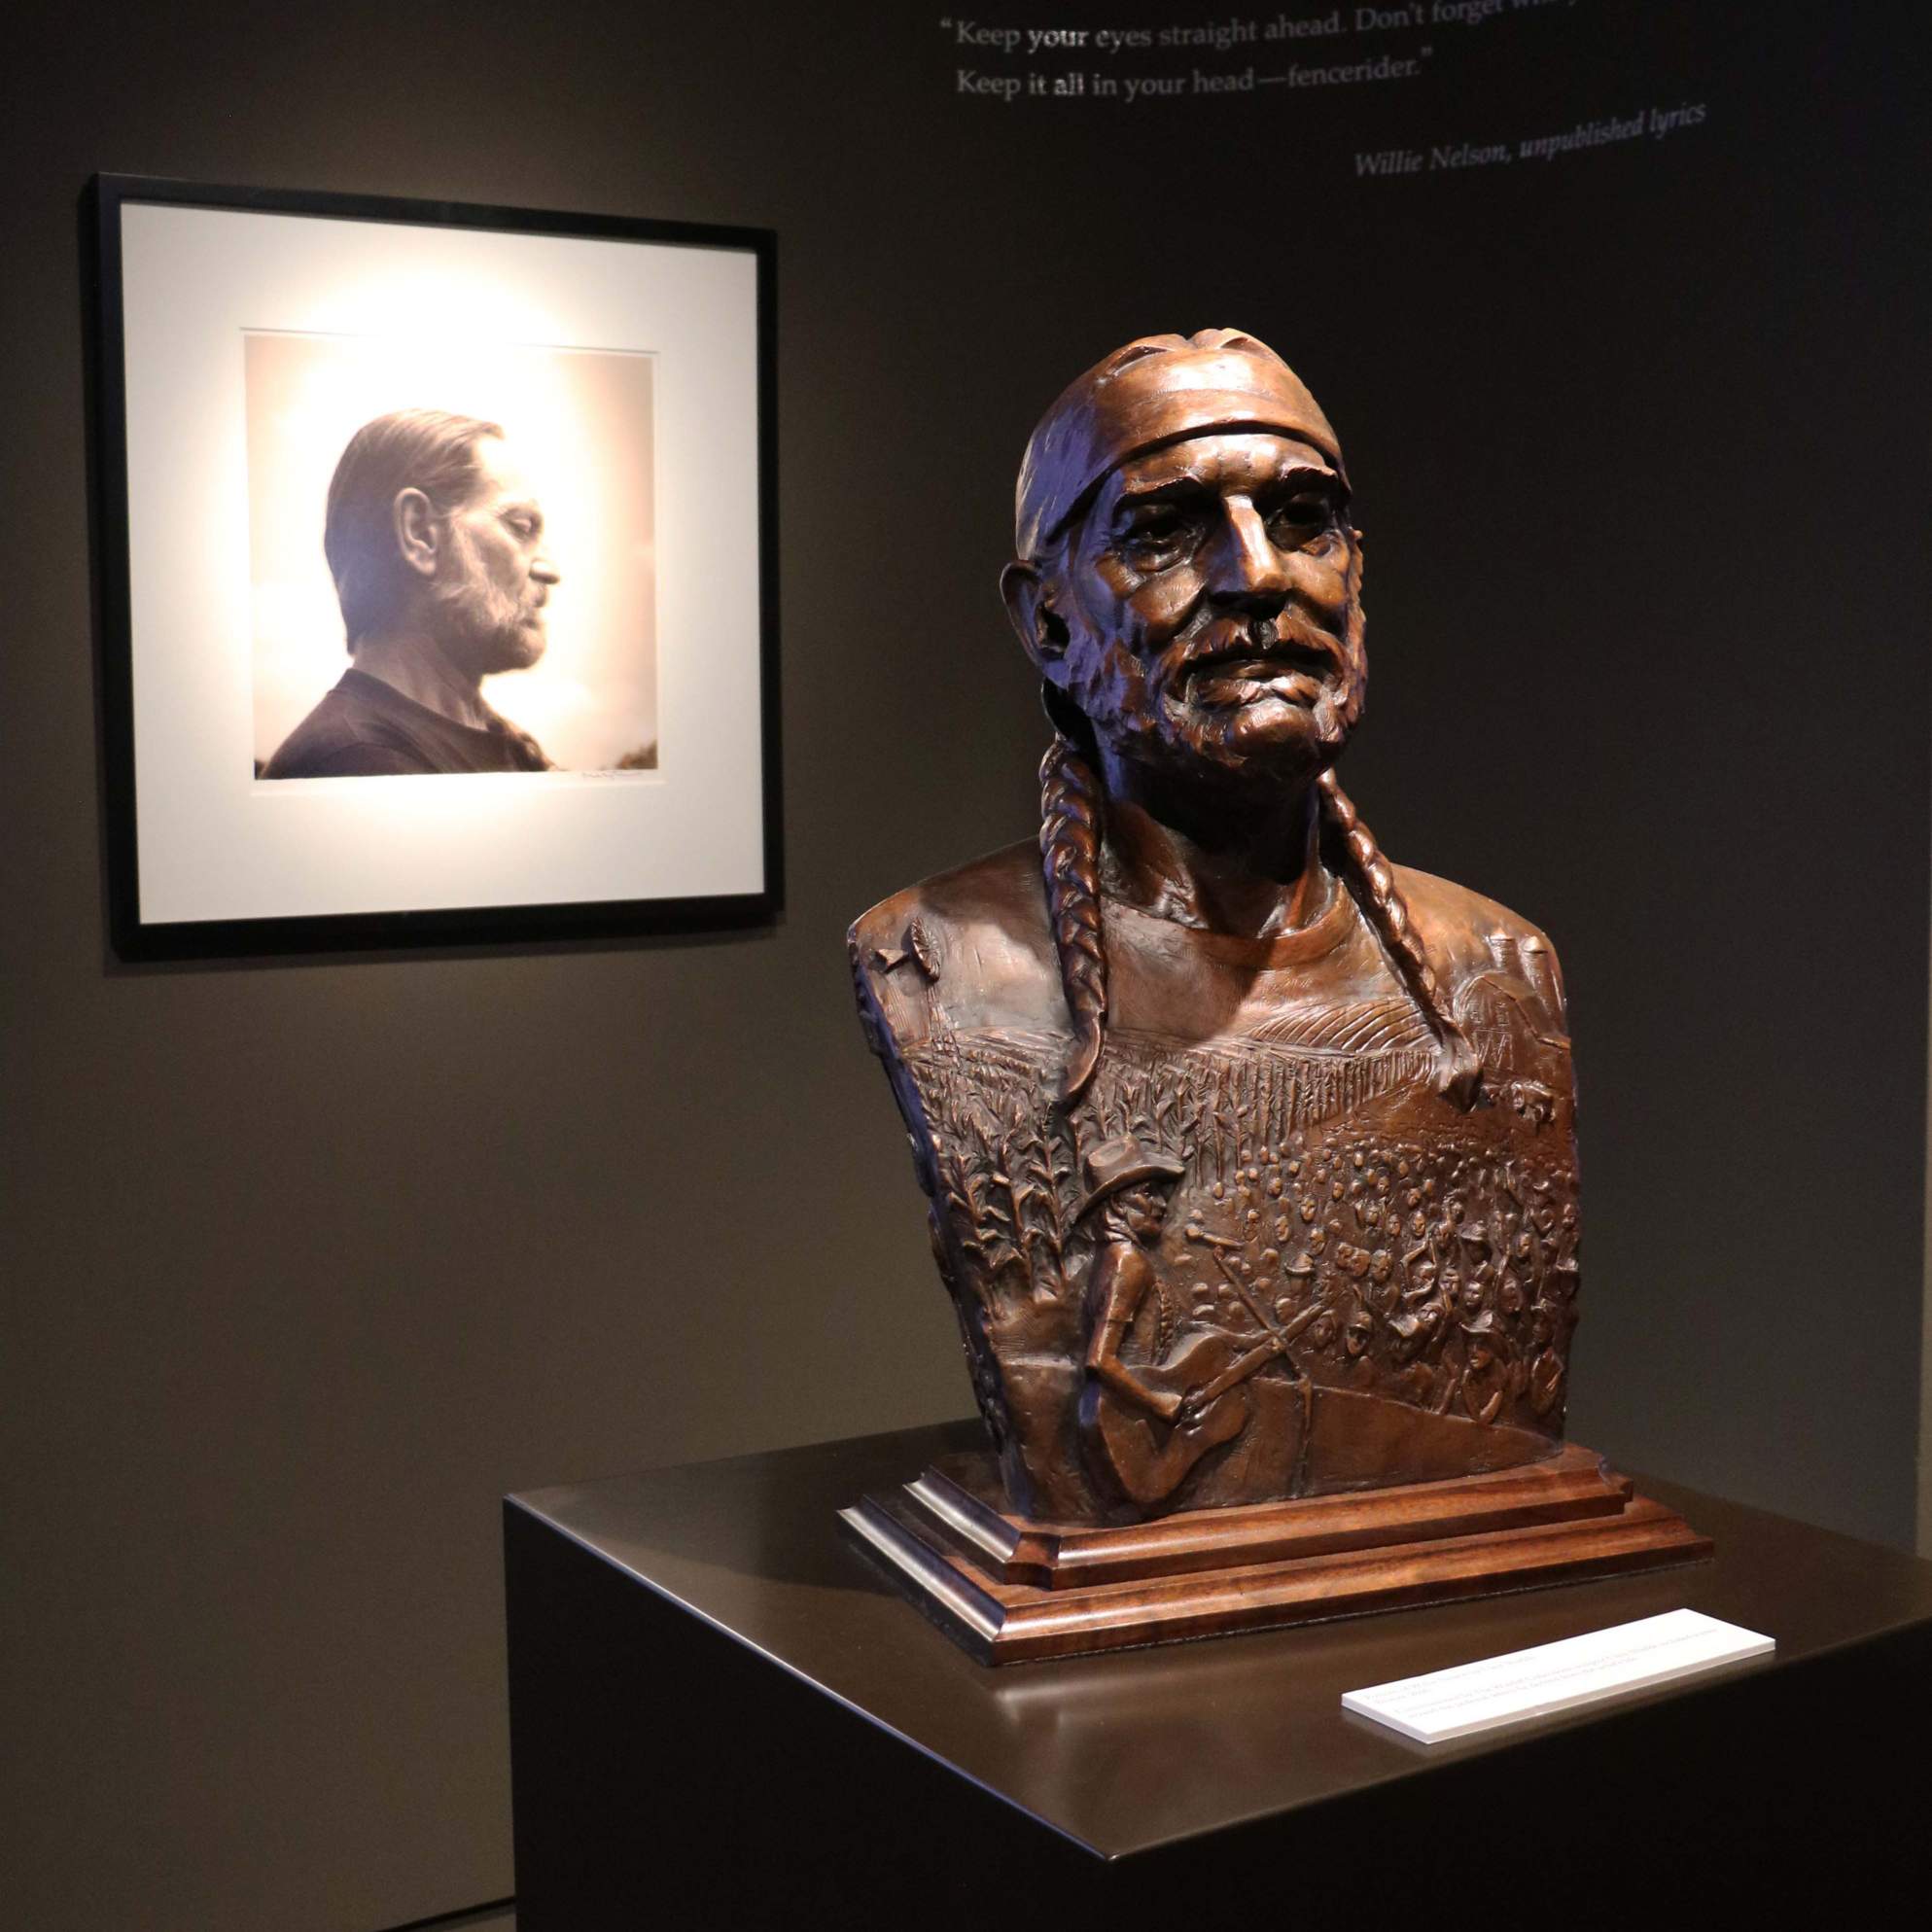 Photo of Willie Nelson statue on display